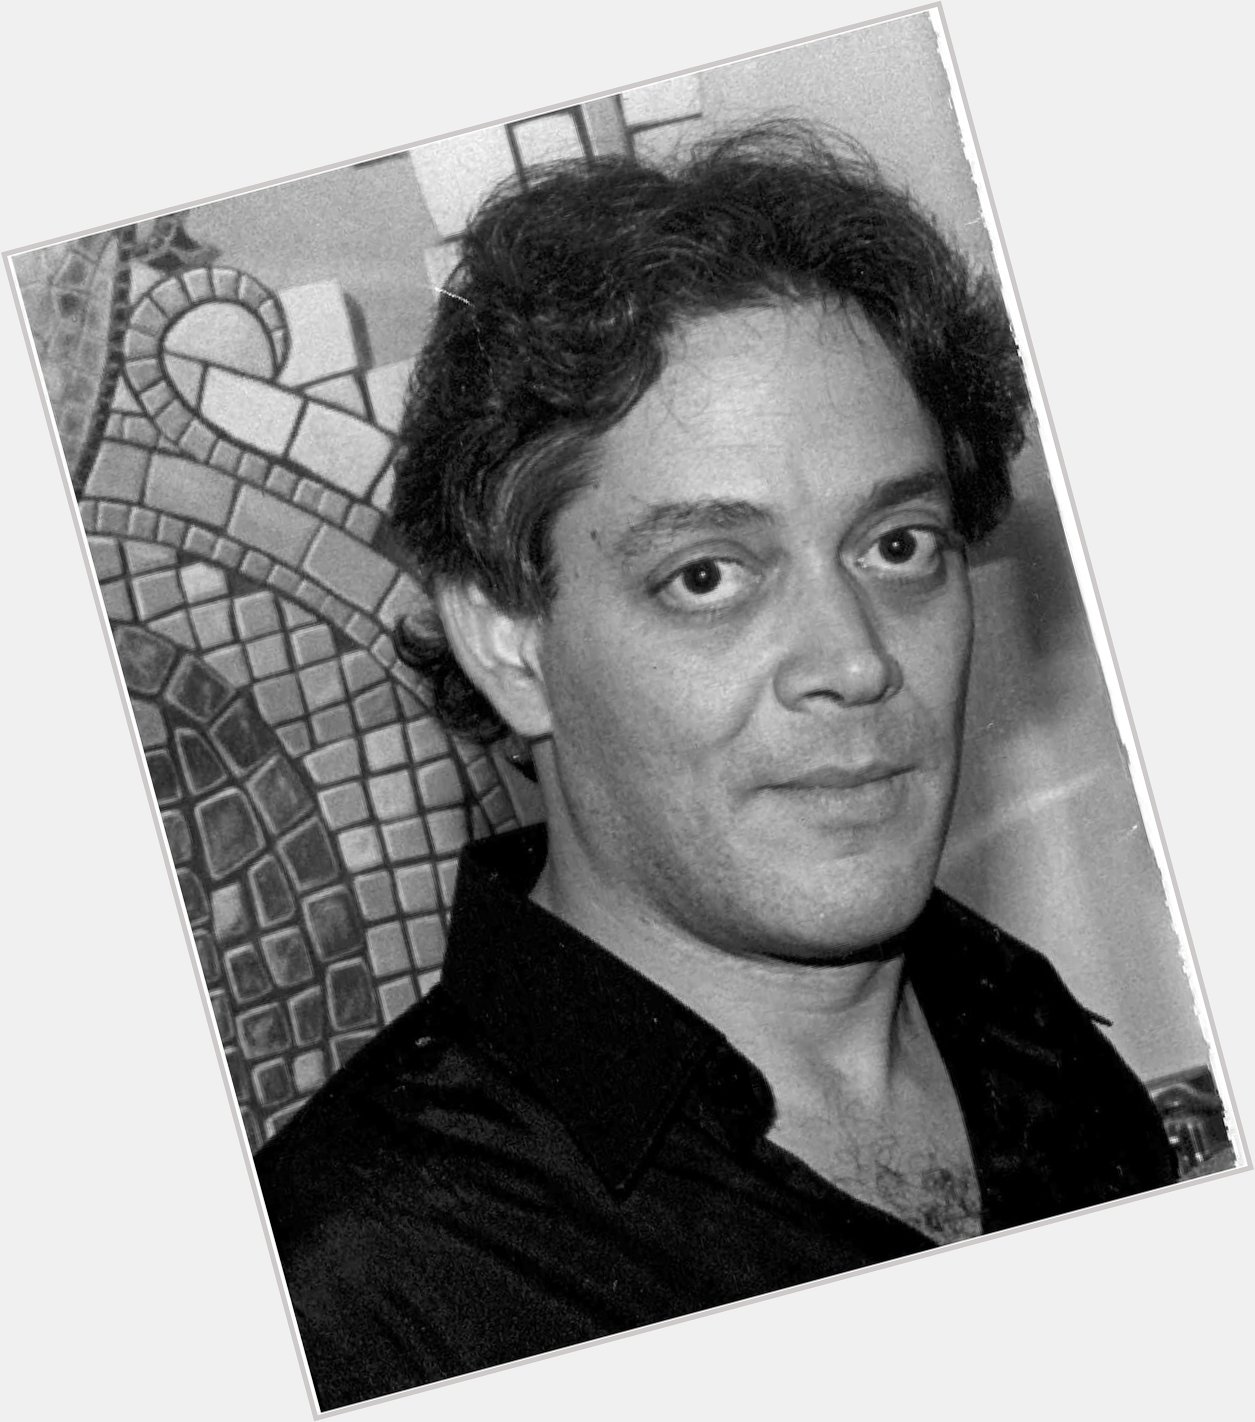 Such a ubiquitous actor in the 80s & 90s. Gone too soon. Happy Birthday, Raul Julia. 